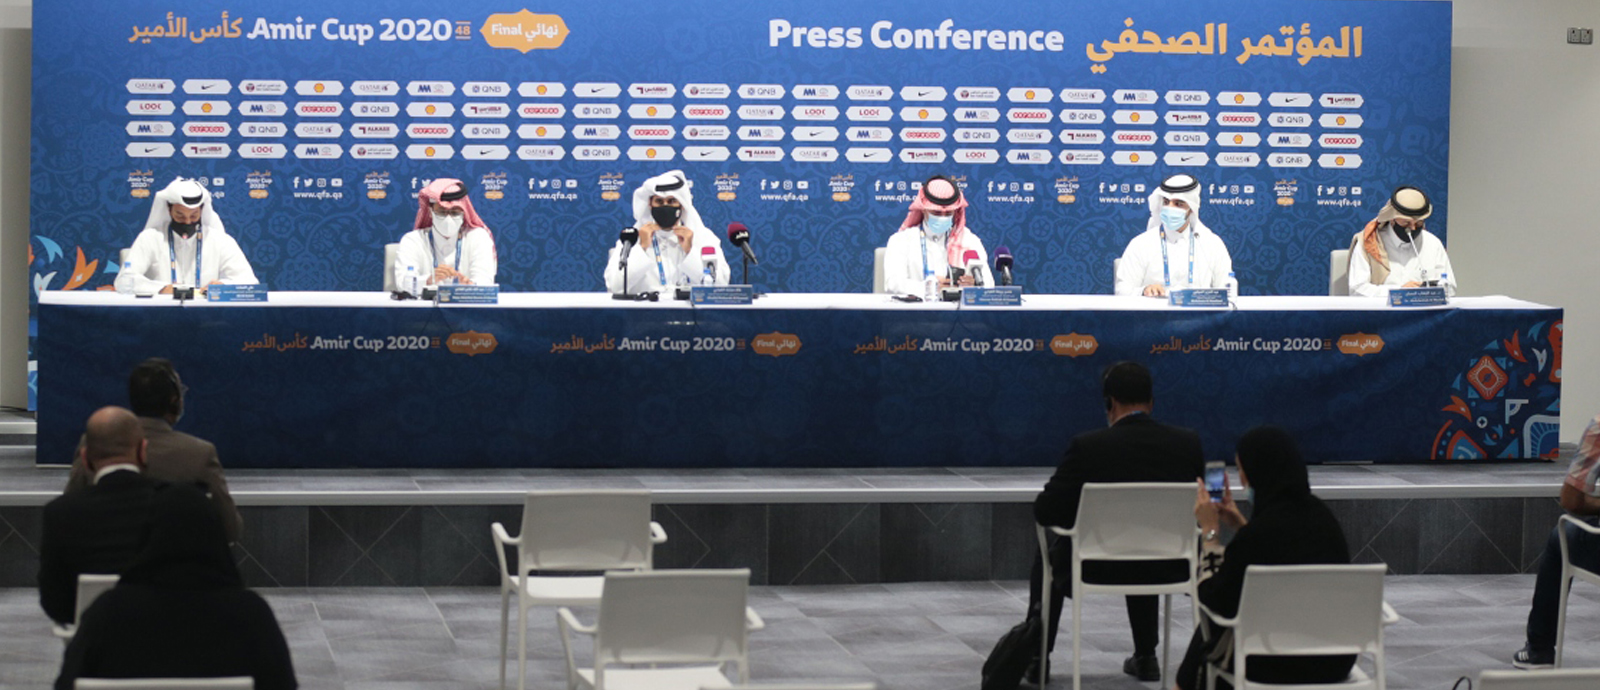 The organizing committee of the Amir Cup